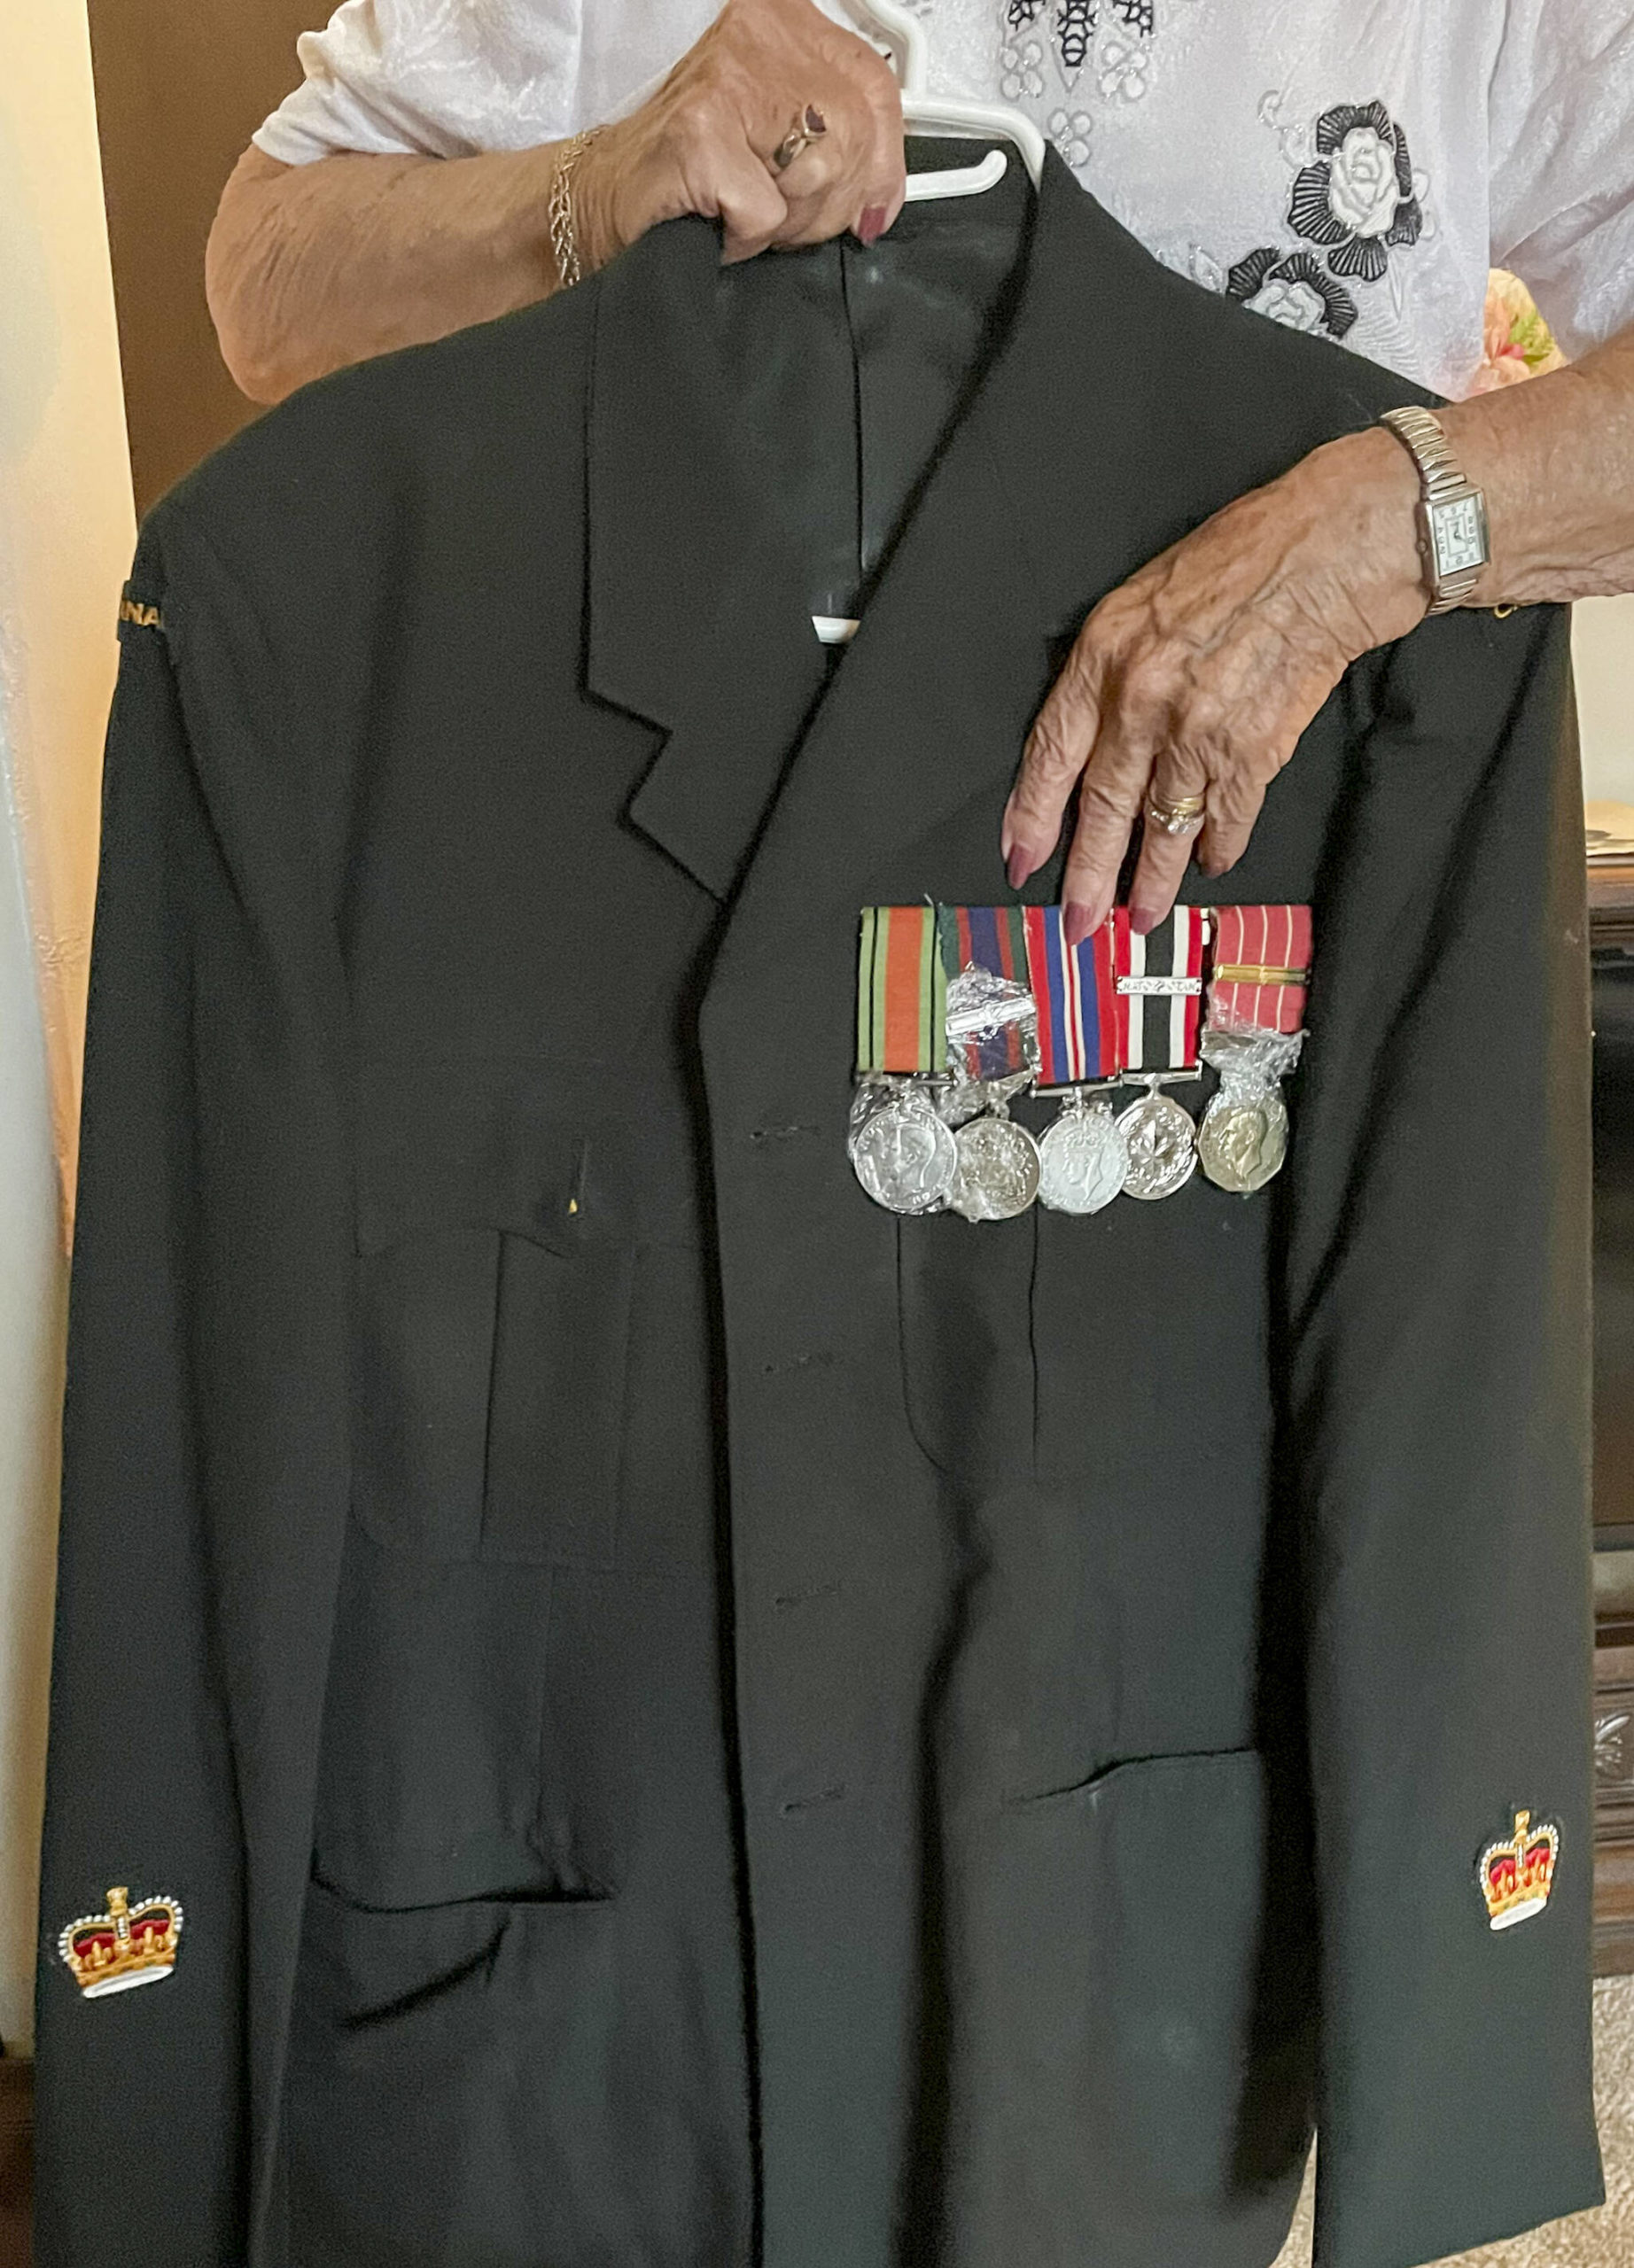 Thelma shows off Rays military uniform and medals. (Photo by Kelsey Yates)